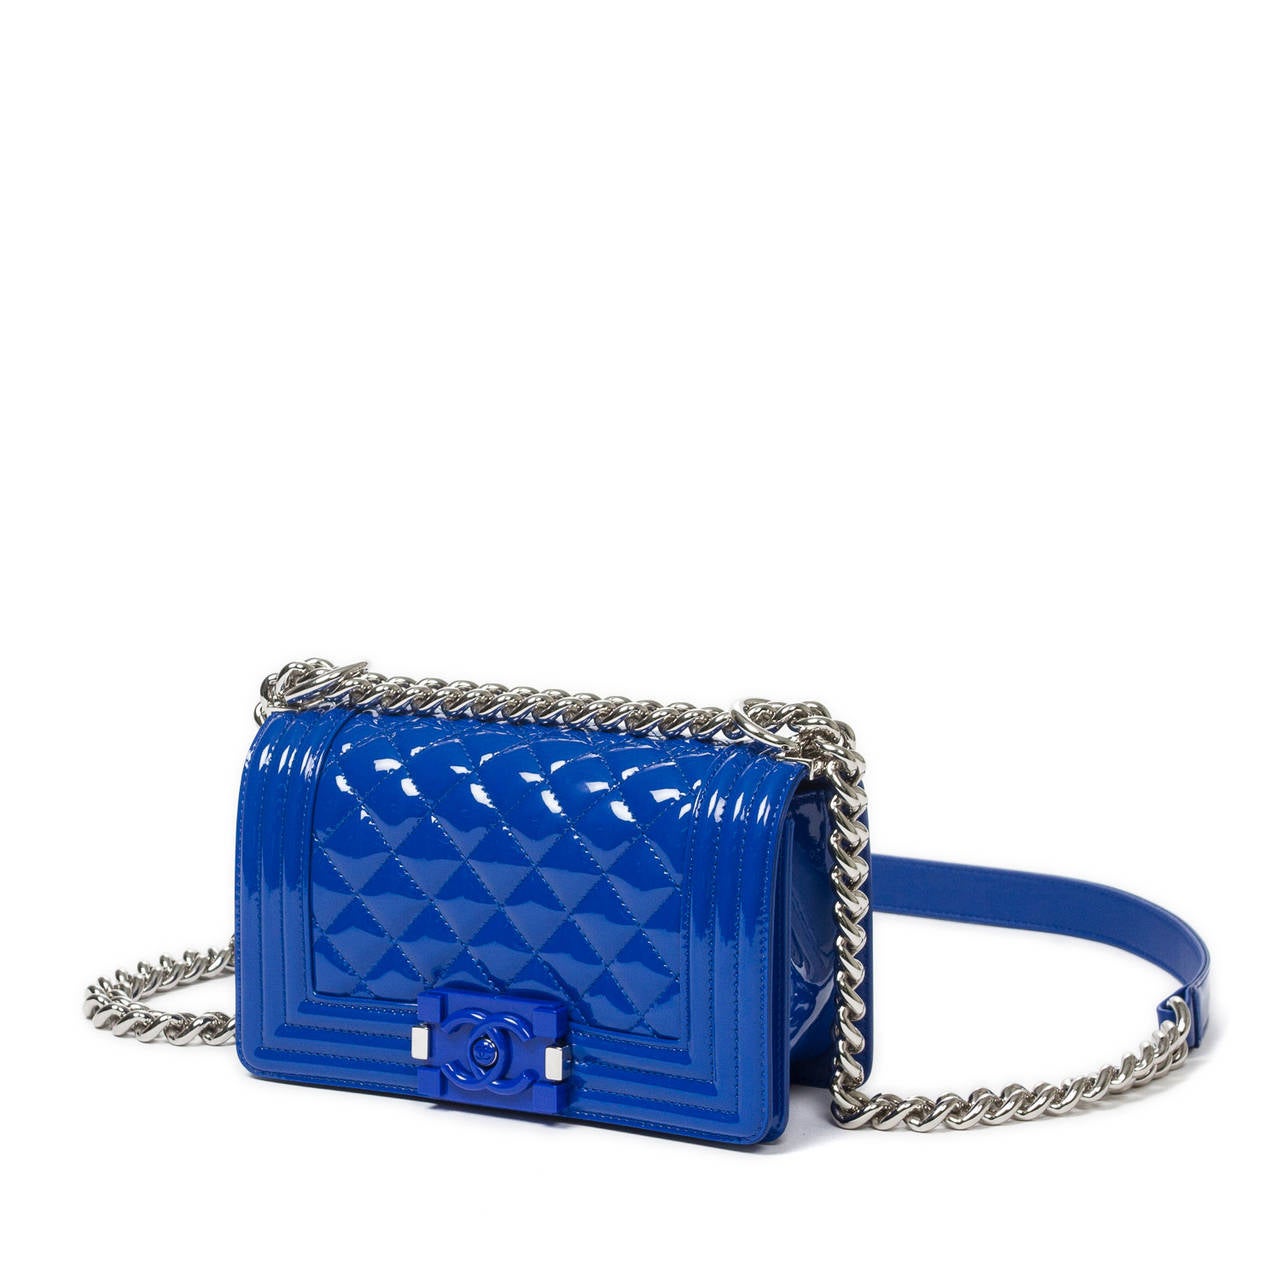 Mini Boy in electric blue quilted patent leather with leather and chain strap, silver tone and bakalite clasp closure. Black canvas lining with one slip pocket. Model from 2015. Box, dustbag and all papers included. Mint condition.